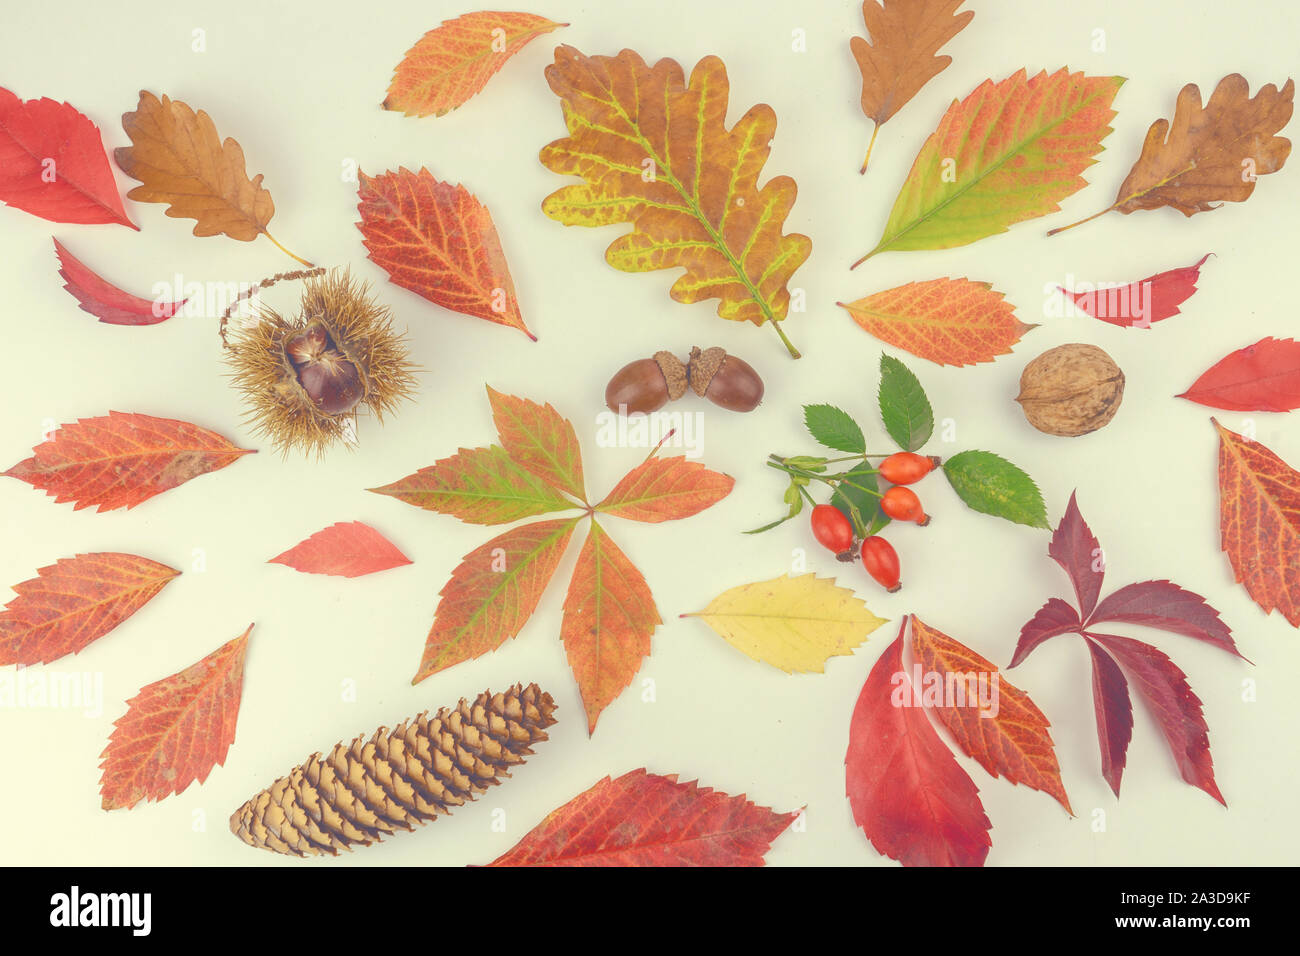 colorful autumn leaves and yields pattern isolated on white background. flat lay, overhead view soft. Stock Photo